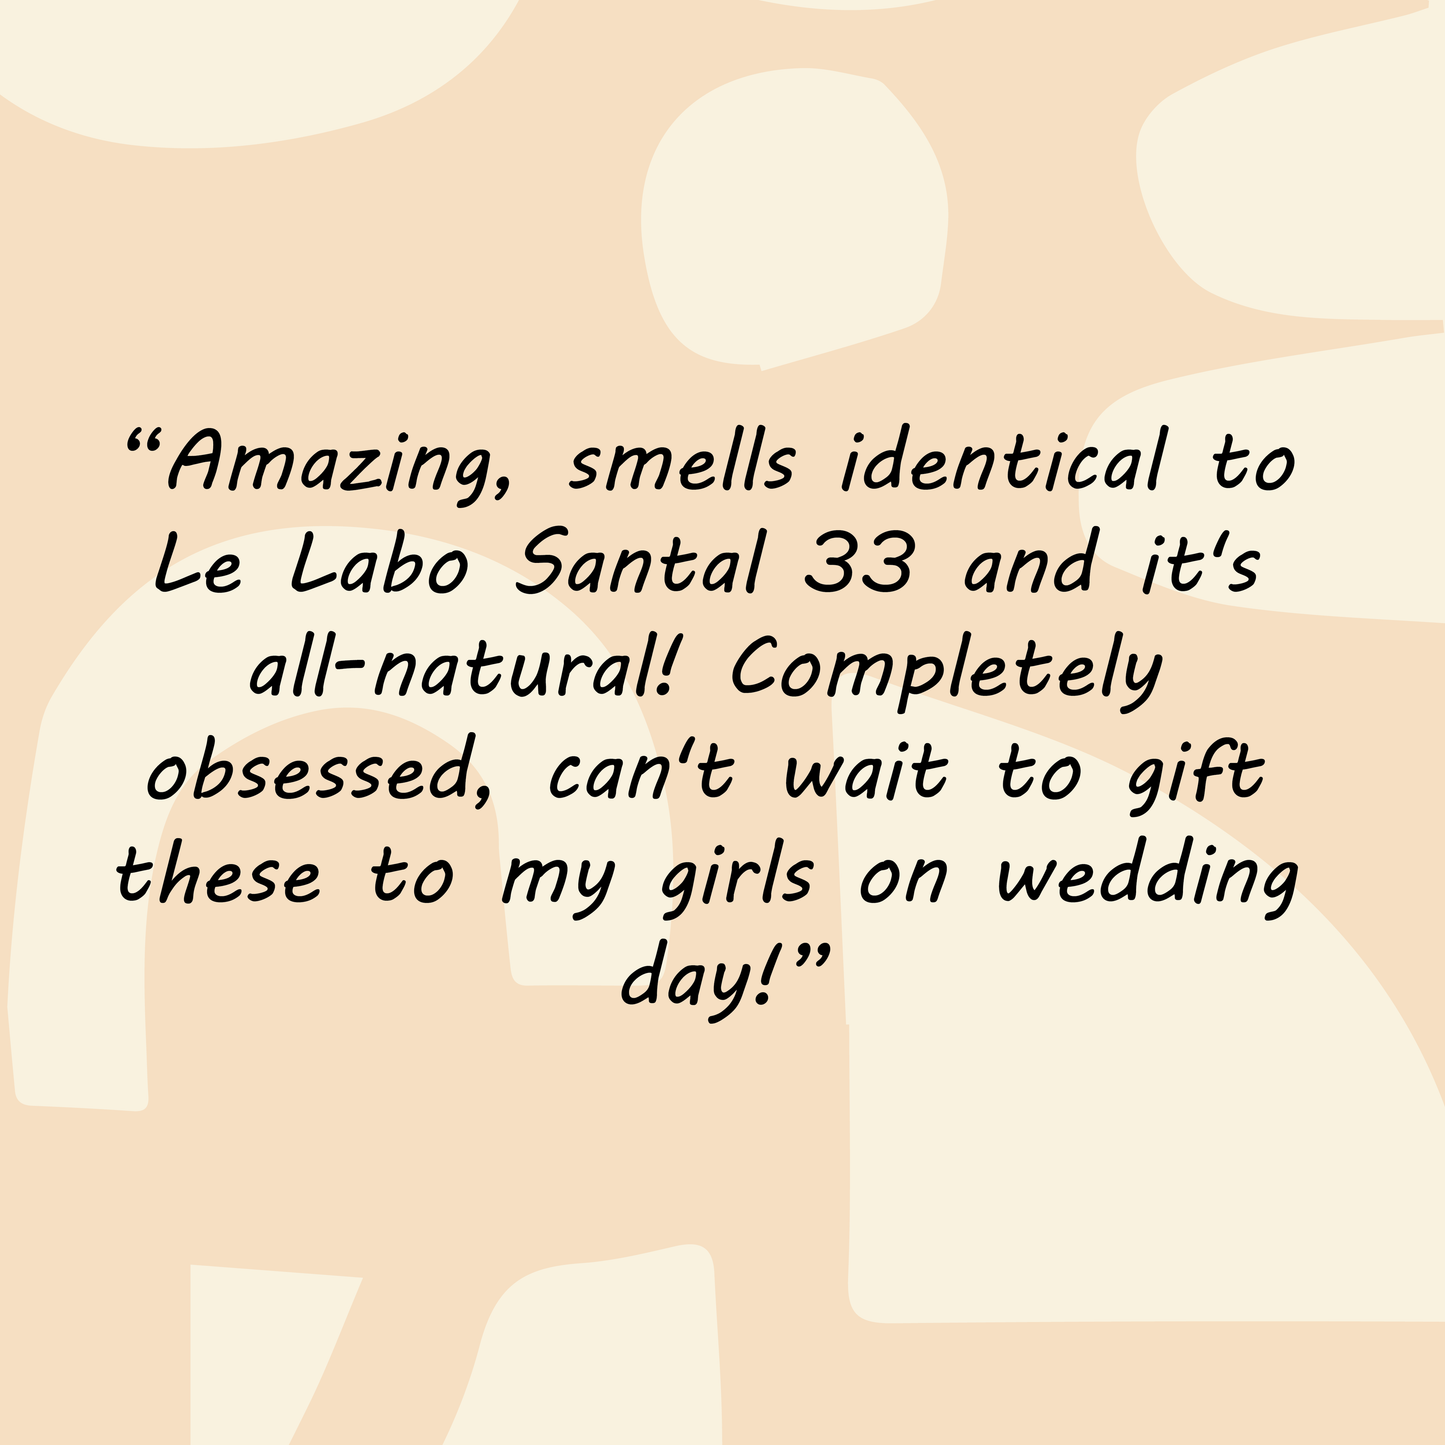 
                  
                    Testimonial for Santal perfume "Amazing, smells identical to Le Labo Santal 33 and it's all-natural! Completely obsessed can't wait to gift these to my girls on wedding day!"
                  
                